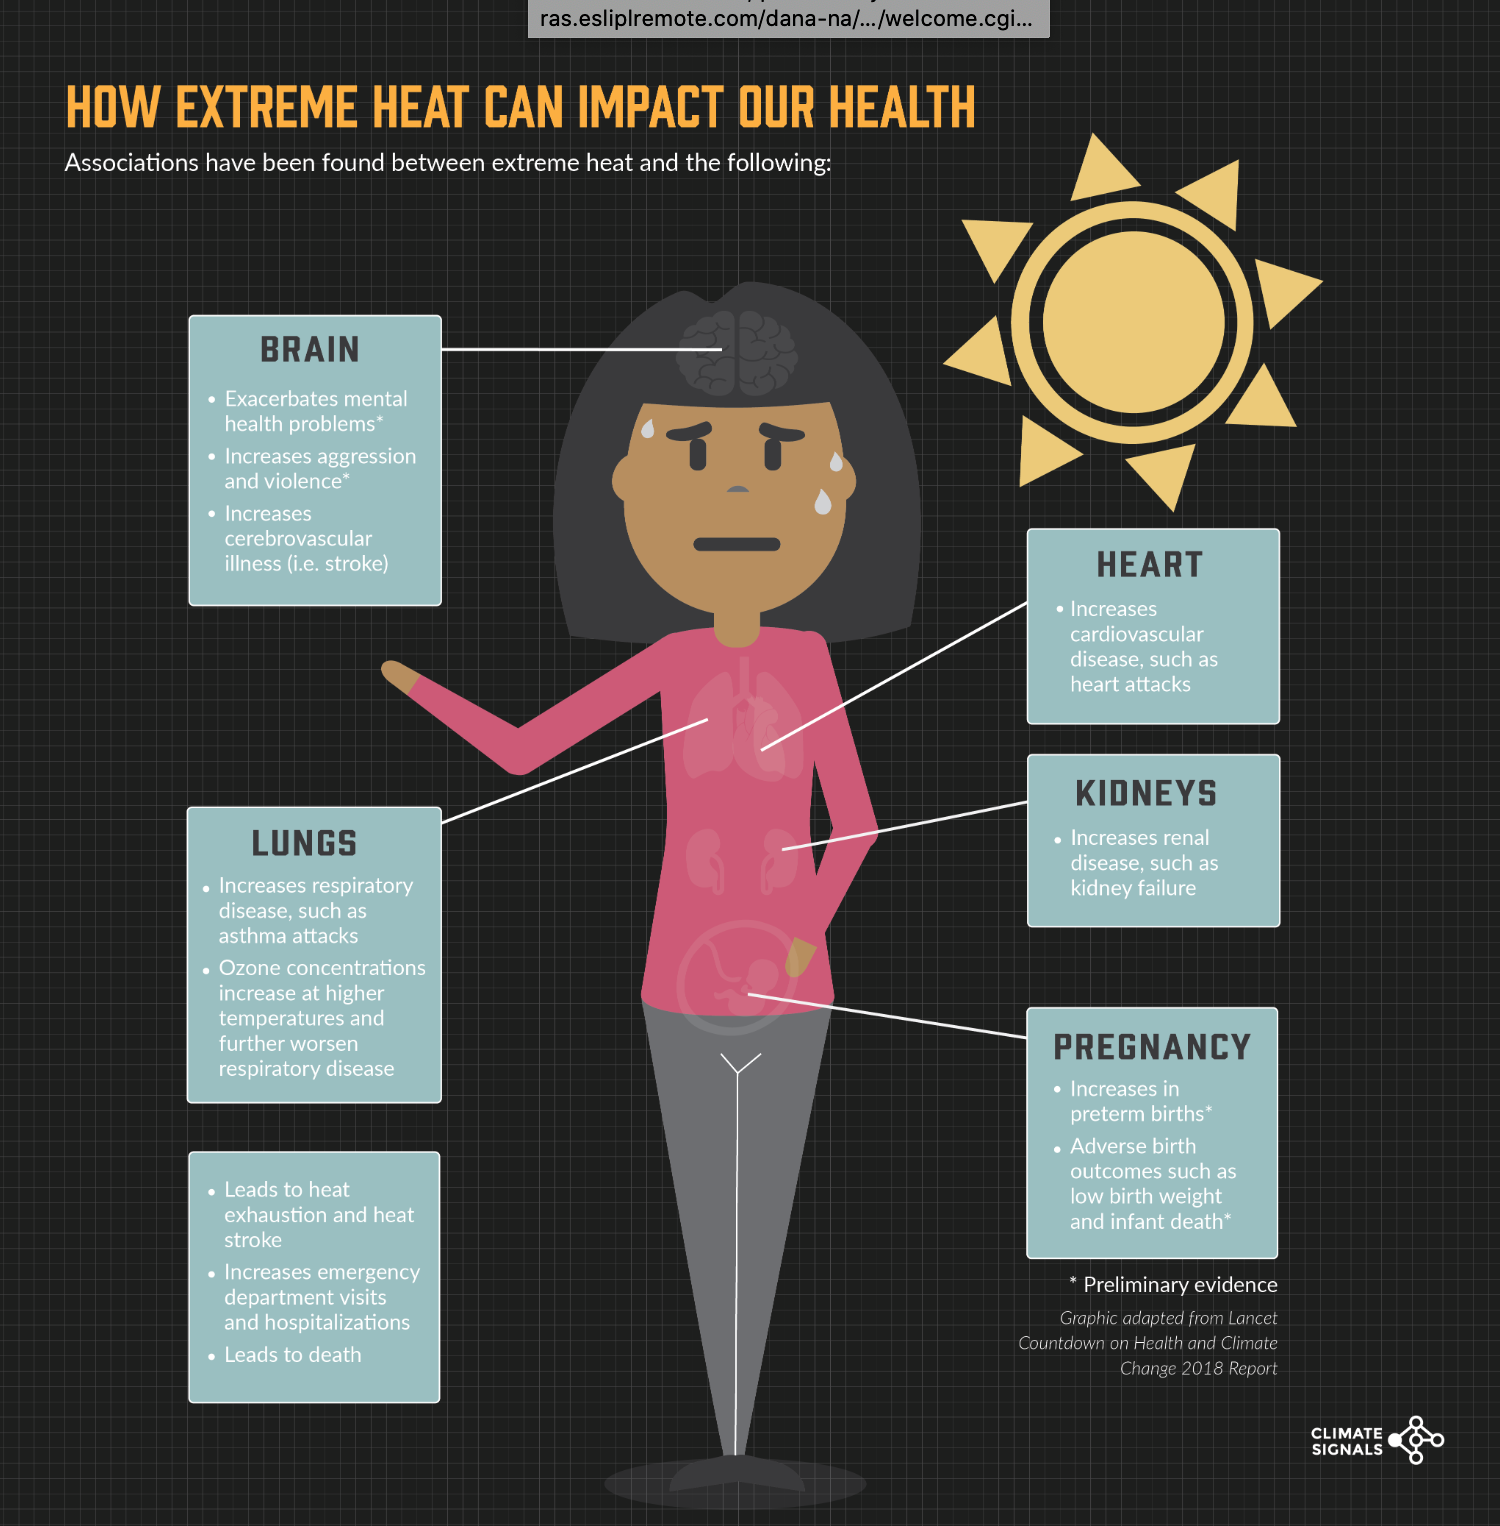 How extreme heat can impact our health